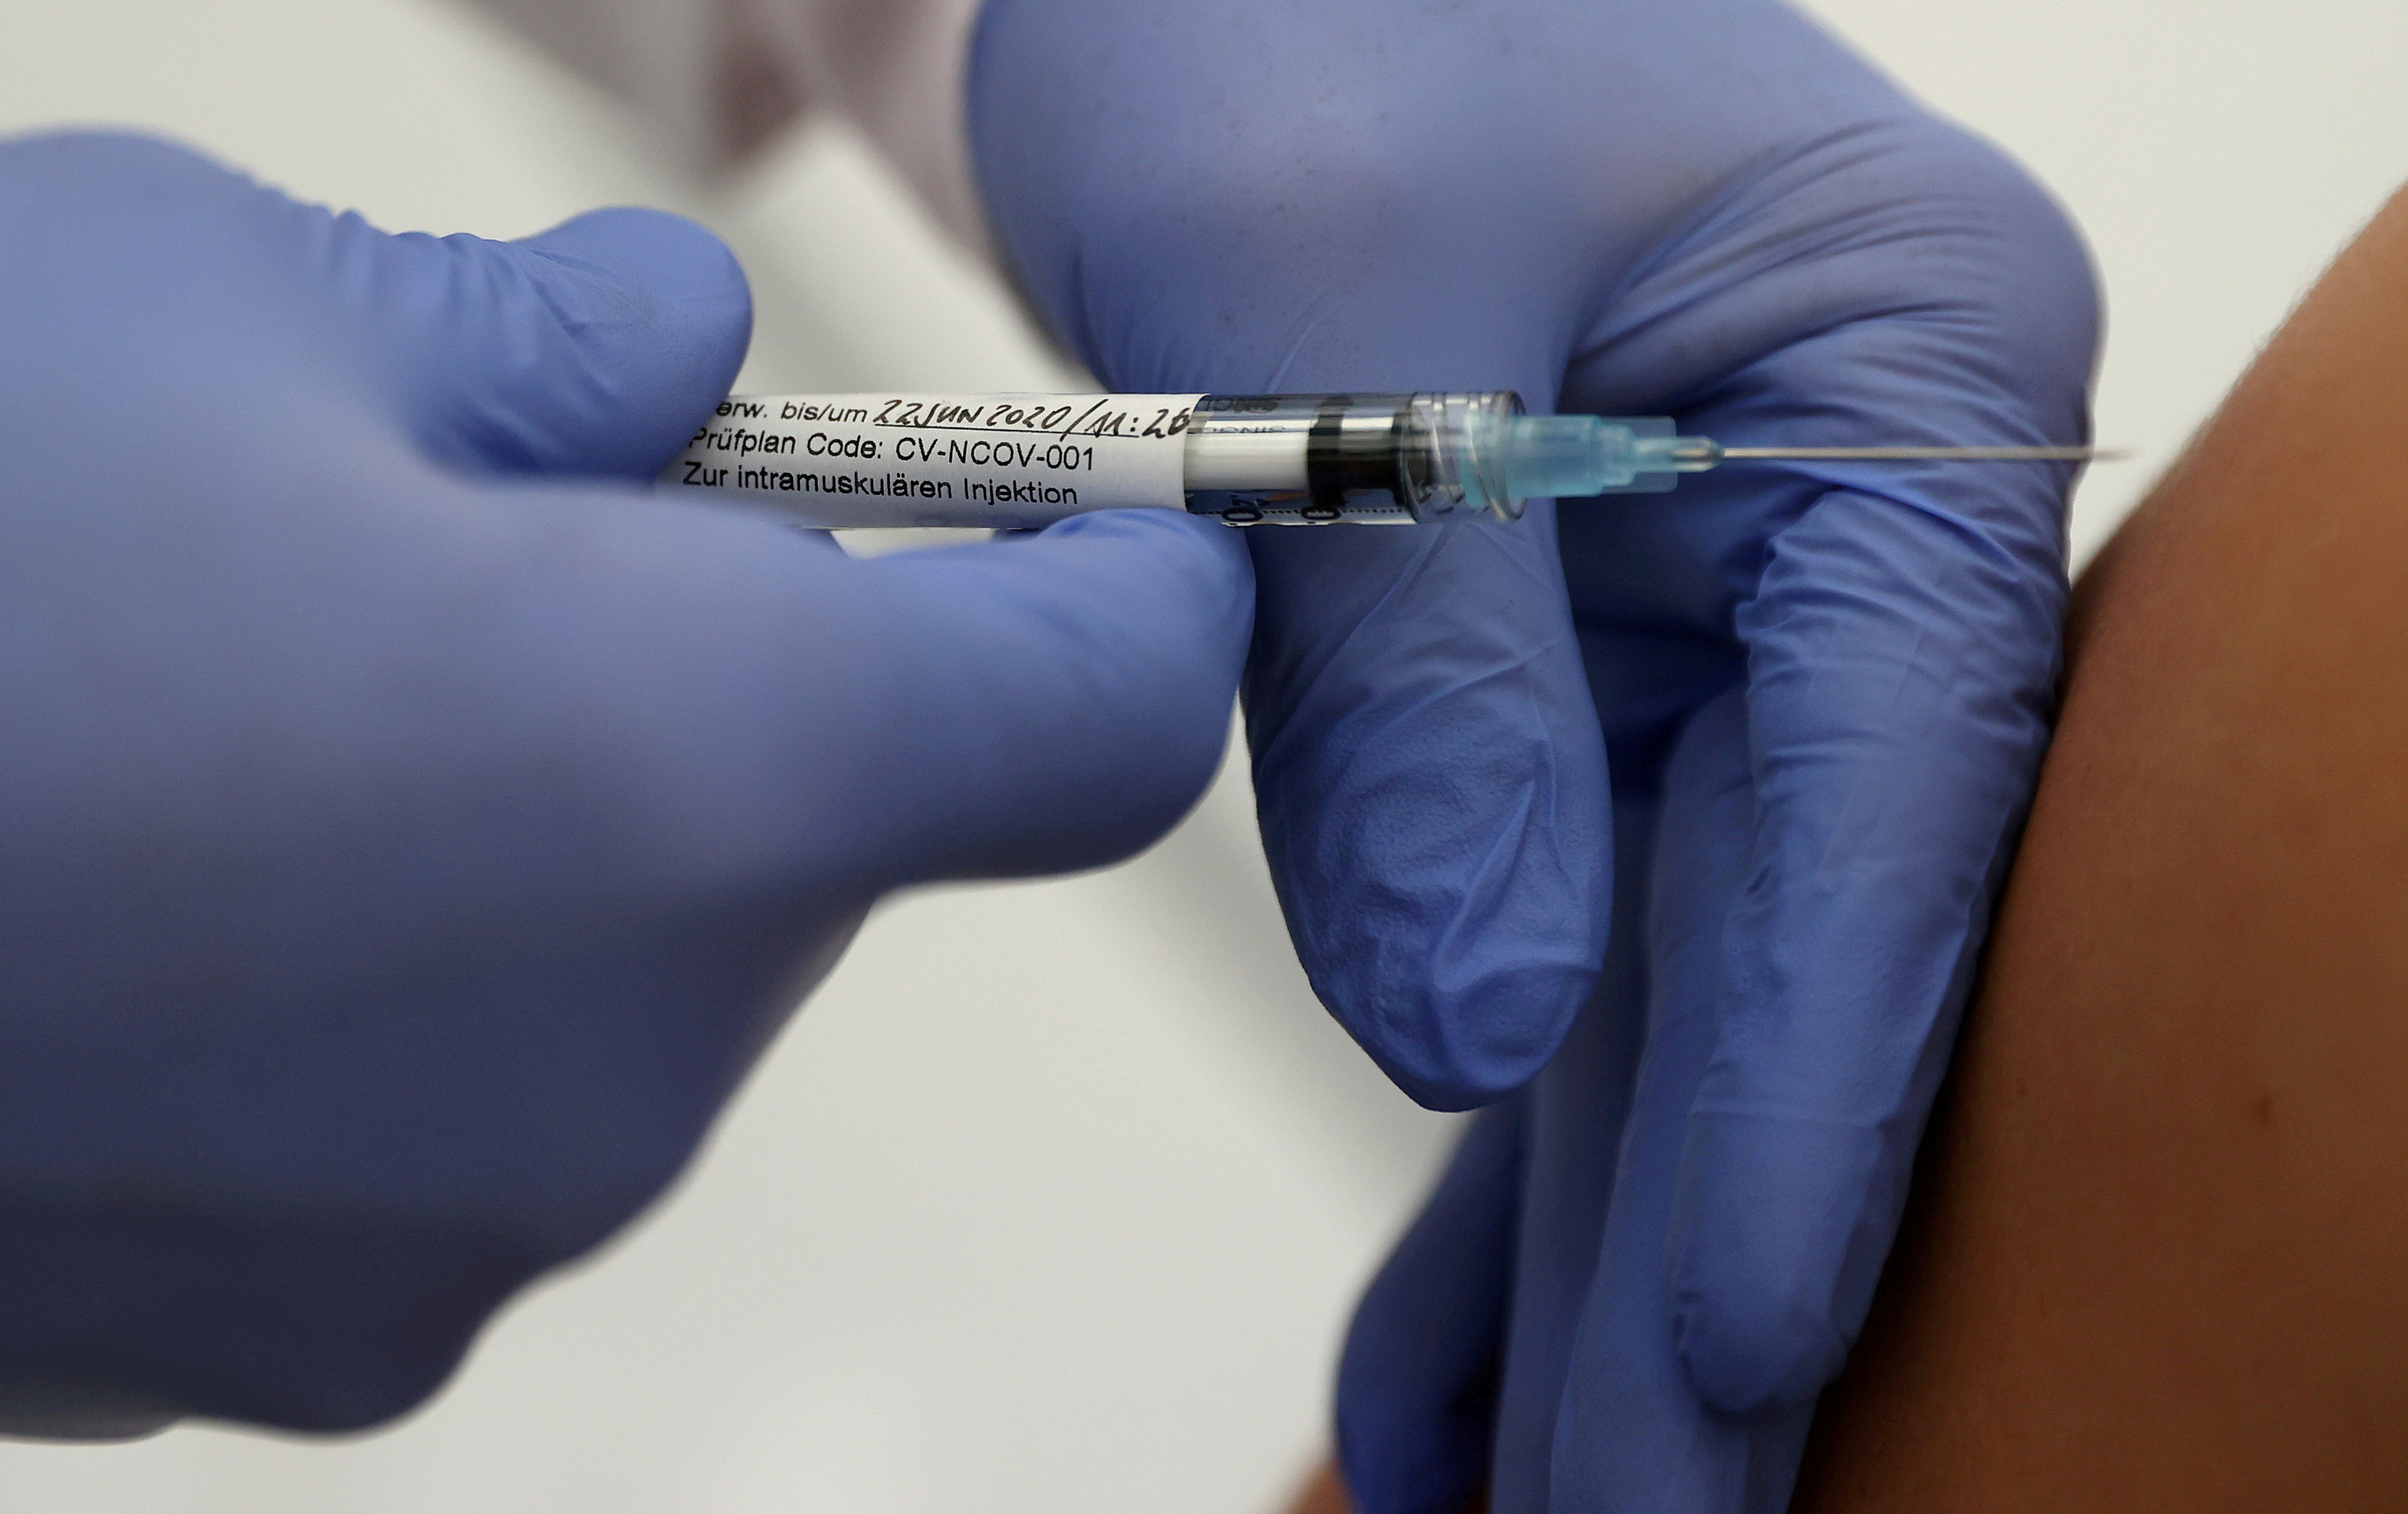 German biotechnology company CureVac's vaccination against the coronavirus disease (COVID-19) is given to a volunteer at the start of a clinical test series in Tuebingen, Germany, June 22, 2020.   REUTERS/Kai Pfaffenbach